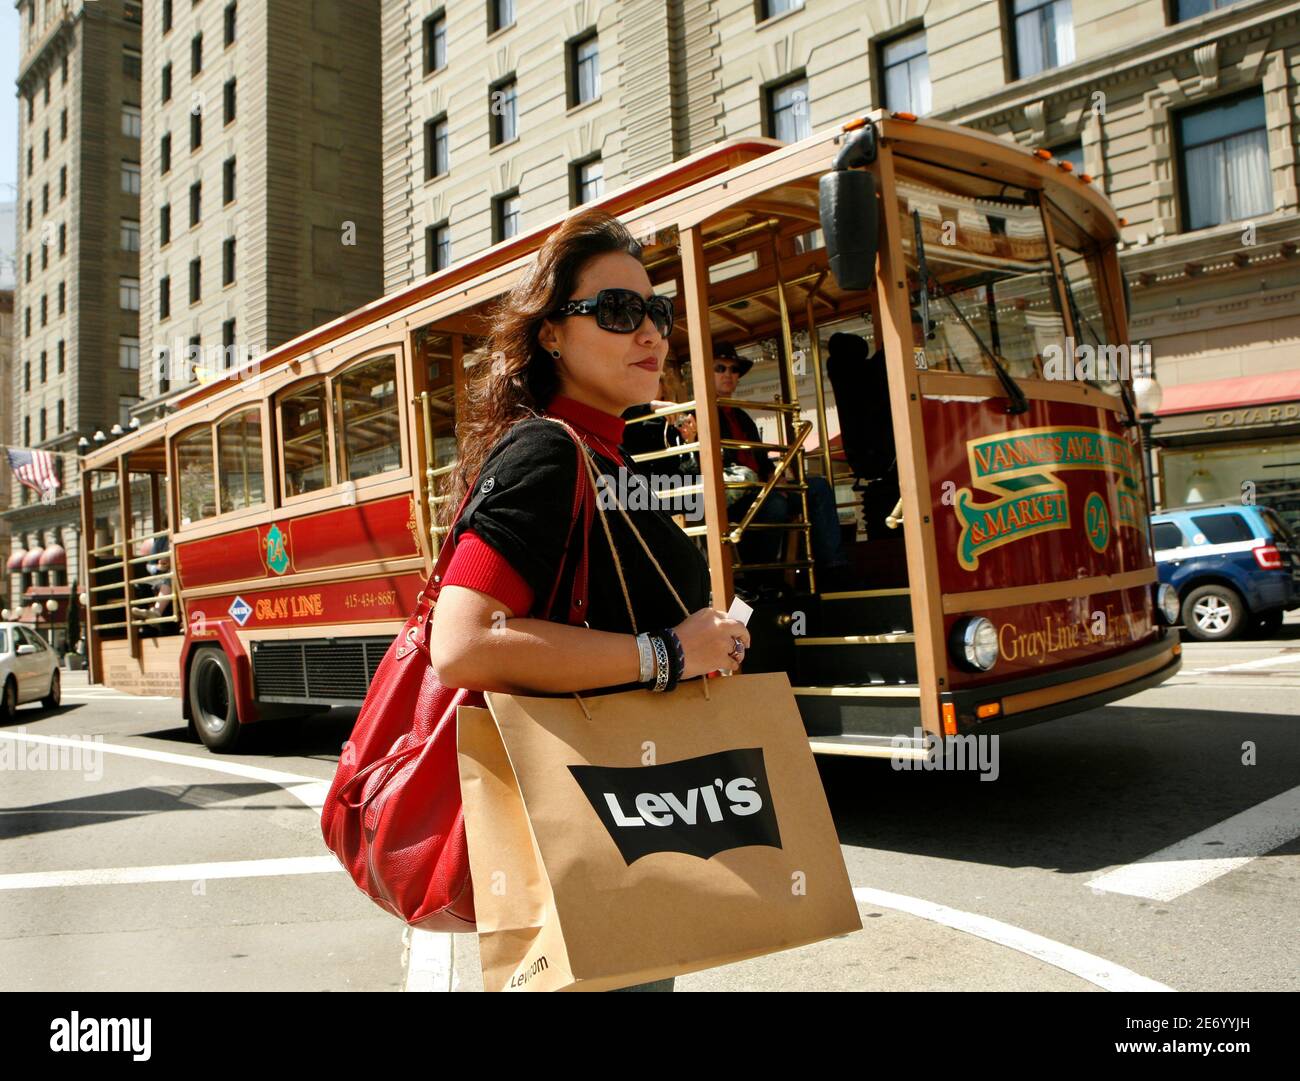 Vanessa Heshiki carries a shopping bag after a purchase at the Levi's  retail store in San Francisco, California April 13, 2010 when it announced  its first quarter earnings. Levi's has been opening